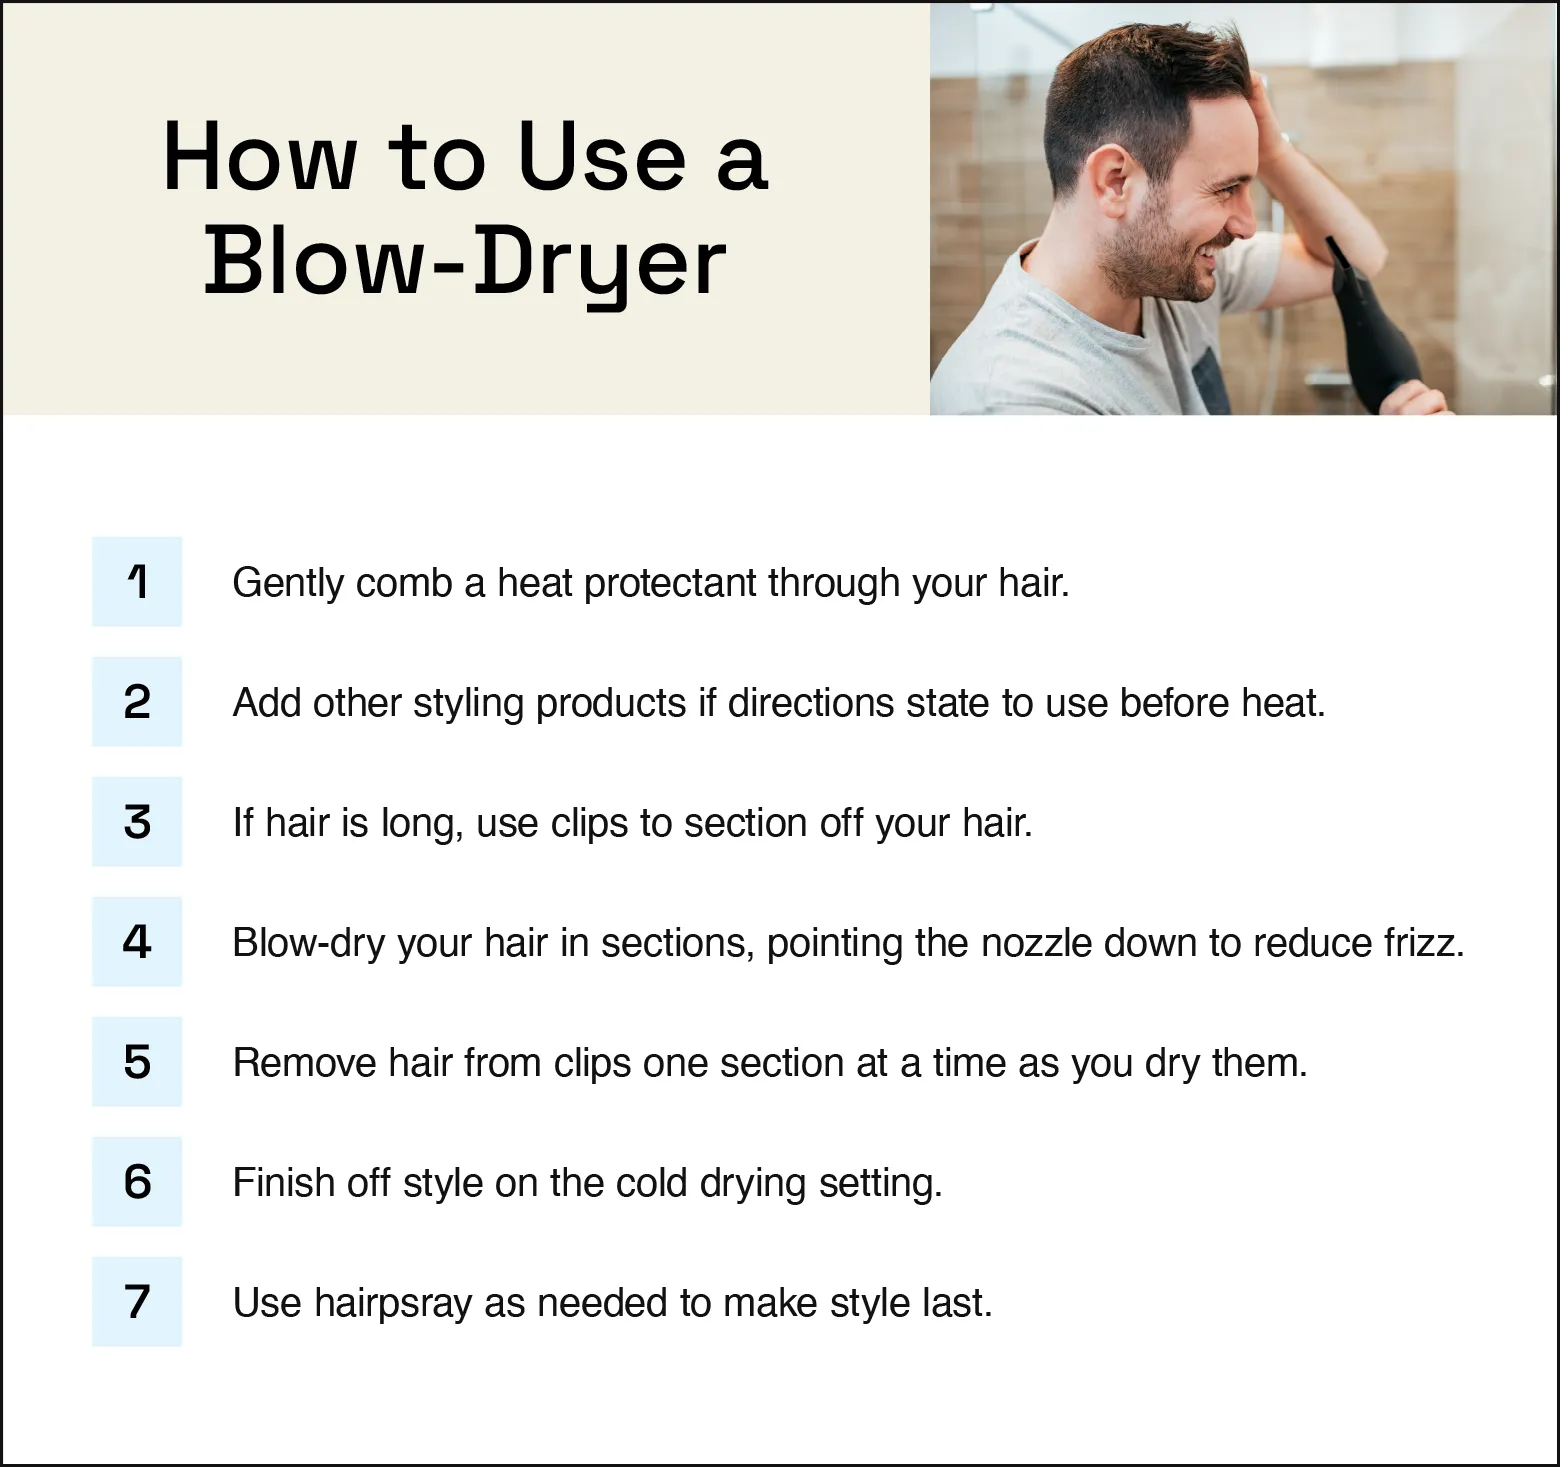 Image provides instructions on how to blow dry your hair step by step.